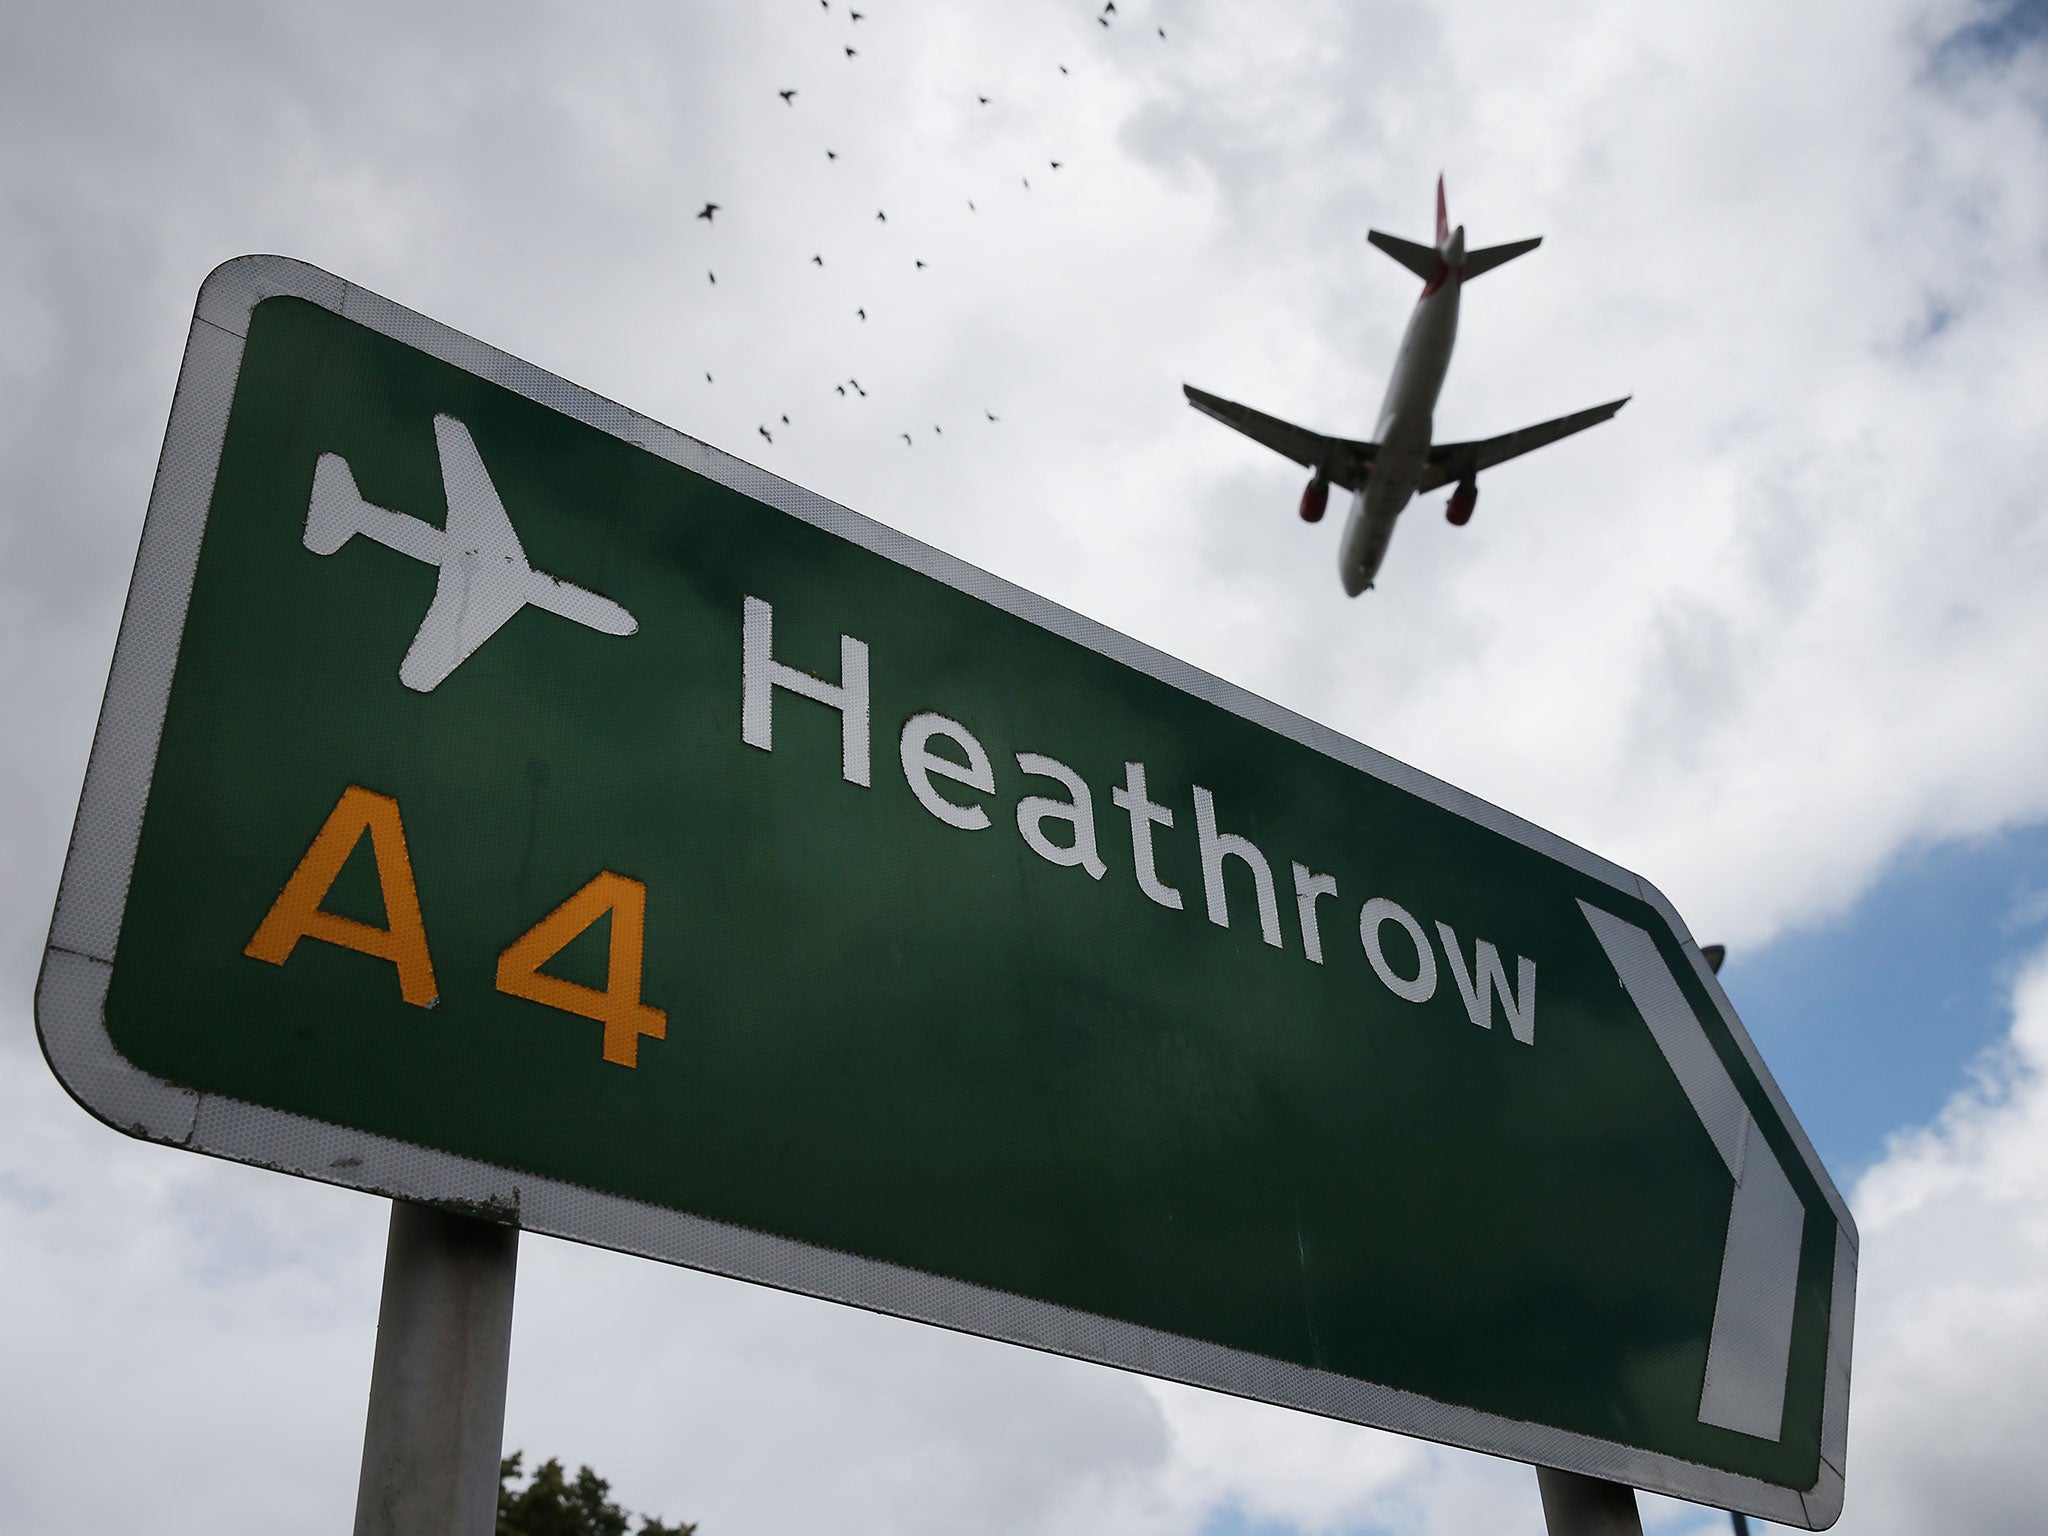 Movements at Heathrow were disrupted in an attempt to increase the distance between arriving aircraft